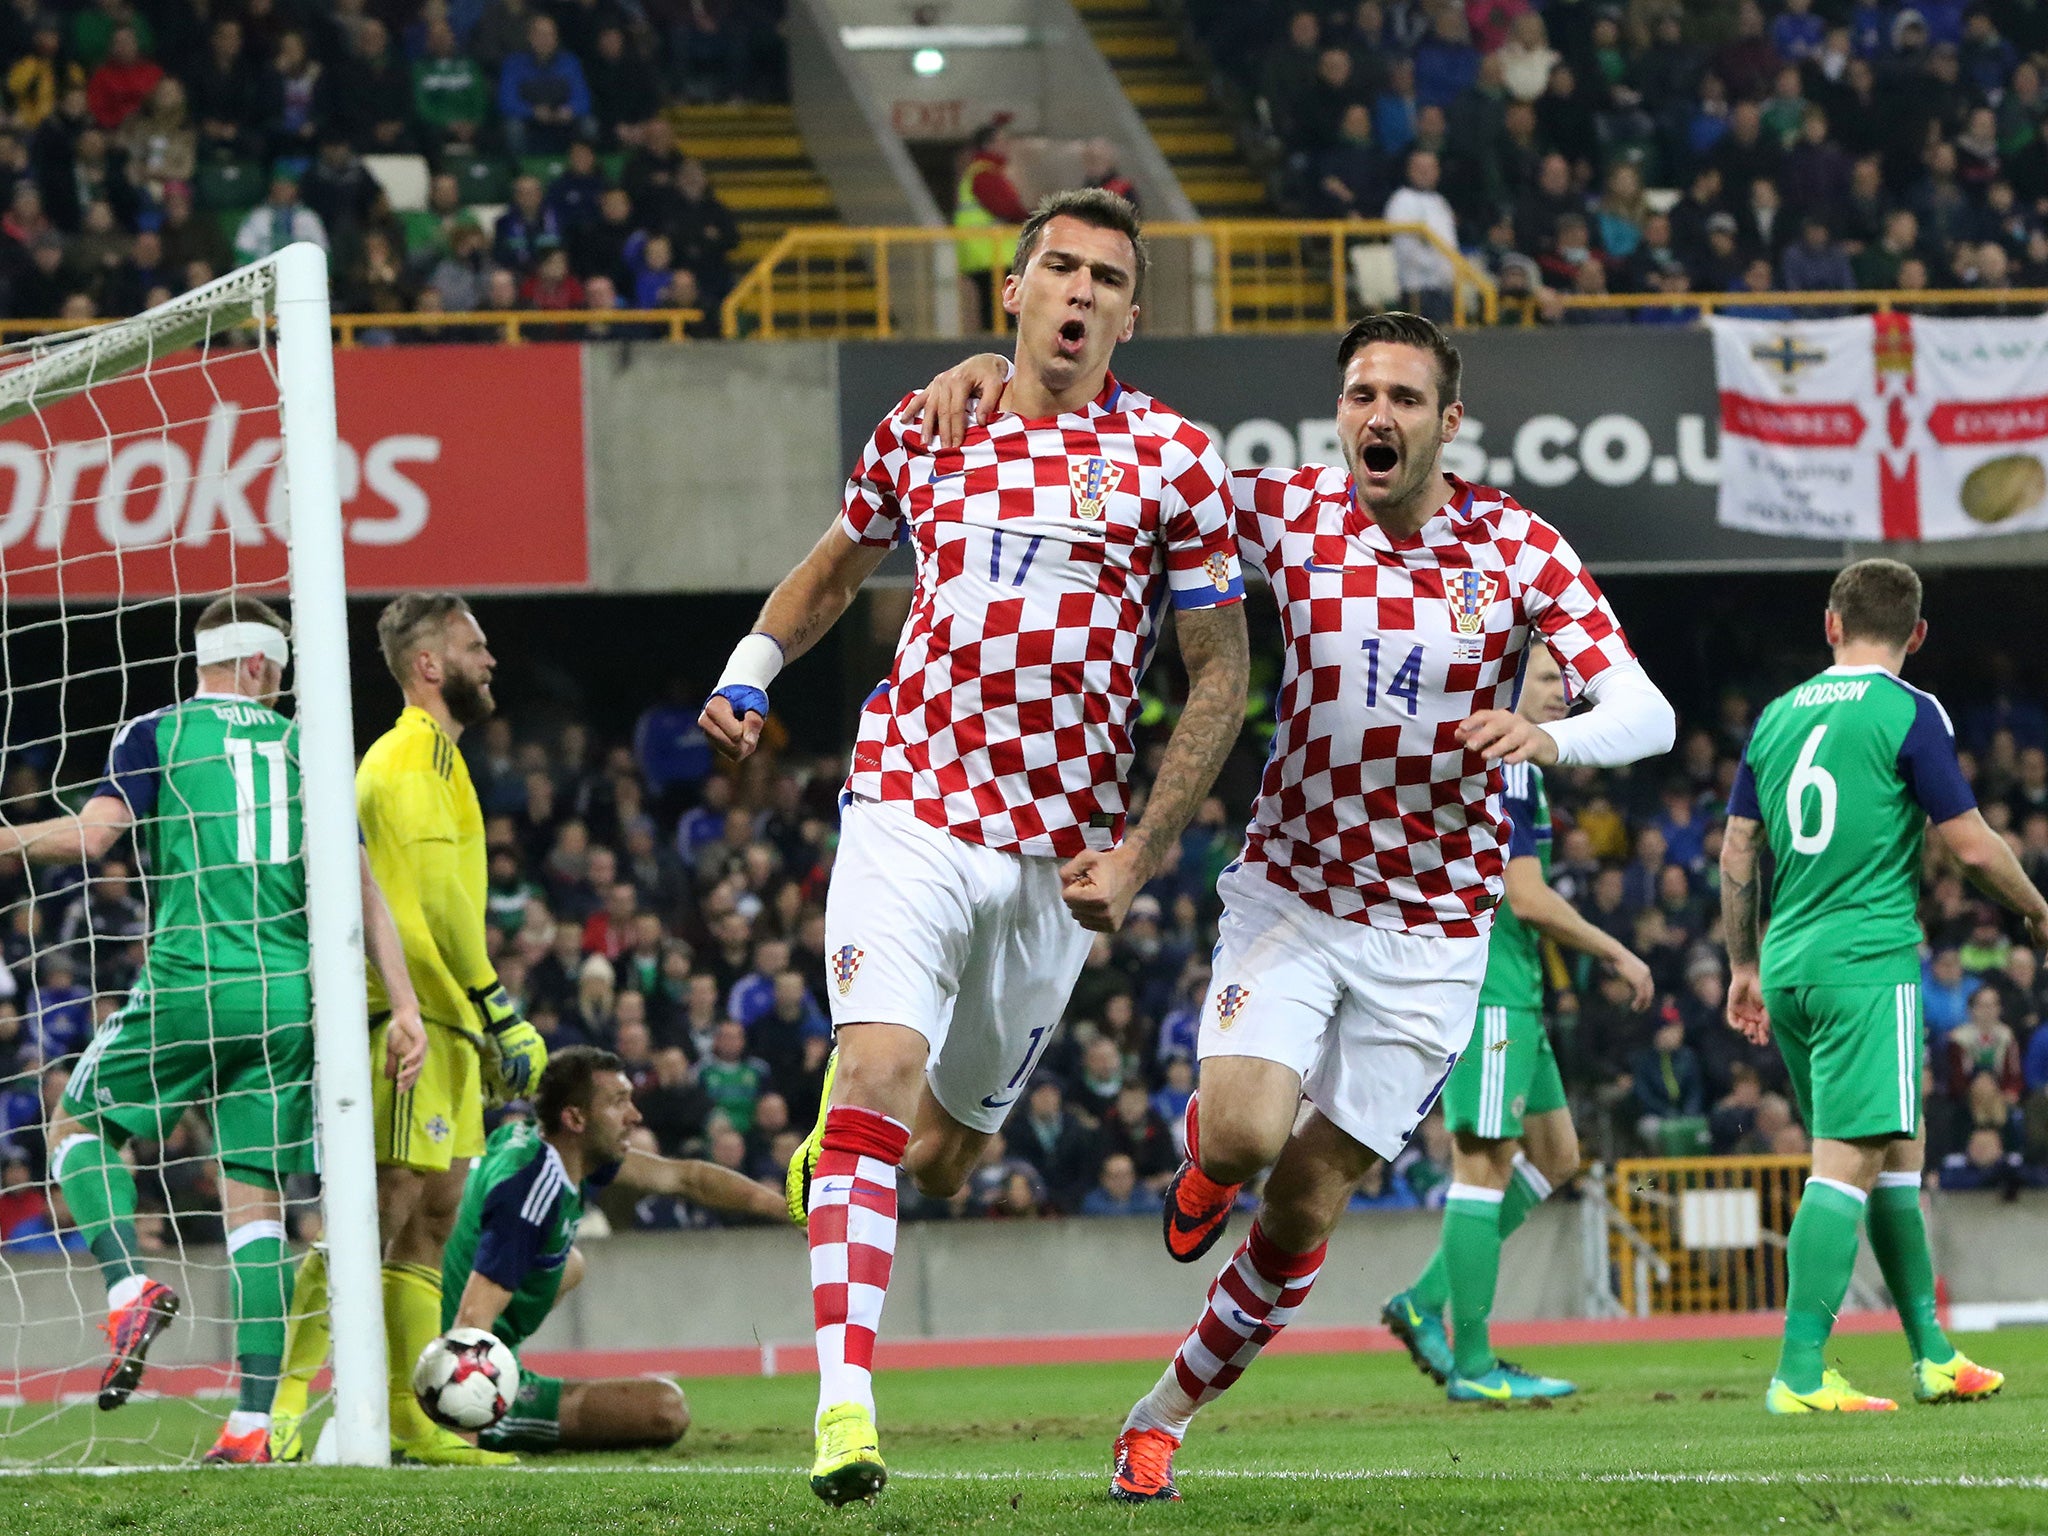 Mandzukic opened the scoring in the 9th minute at Windsor Park